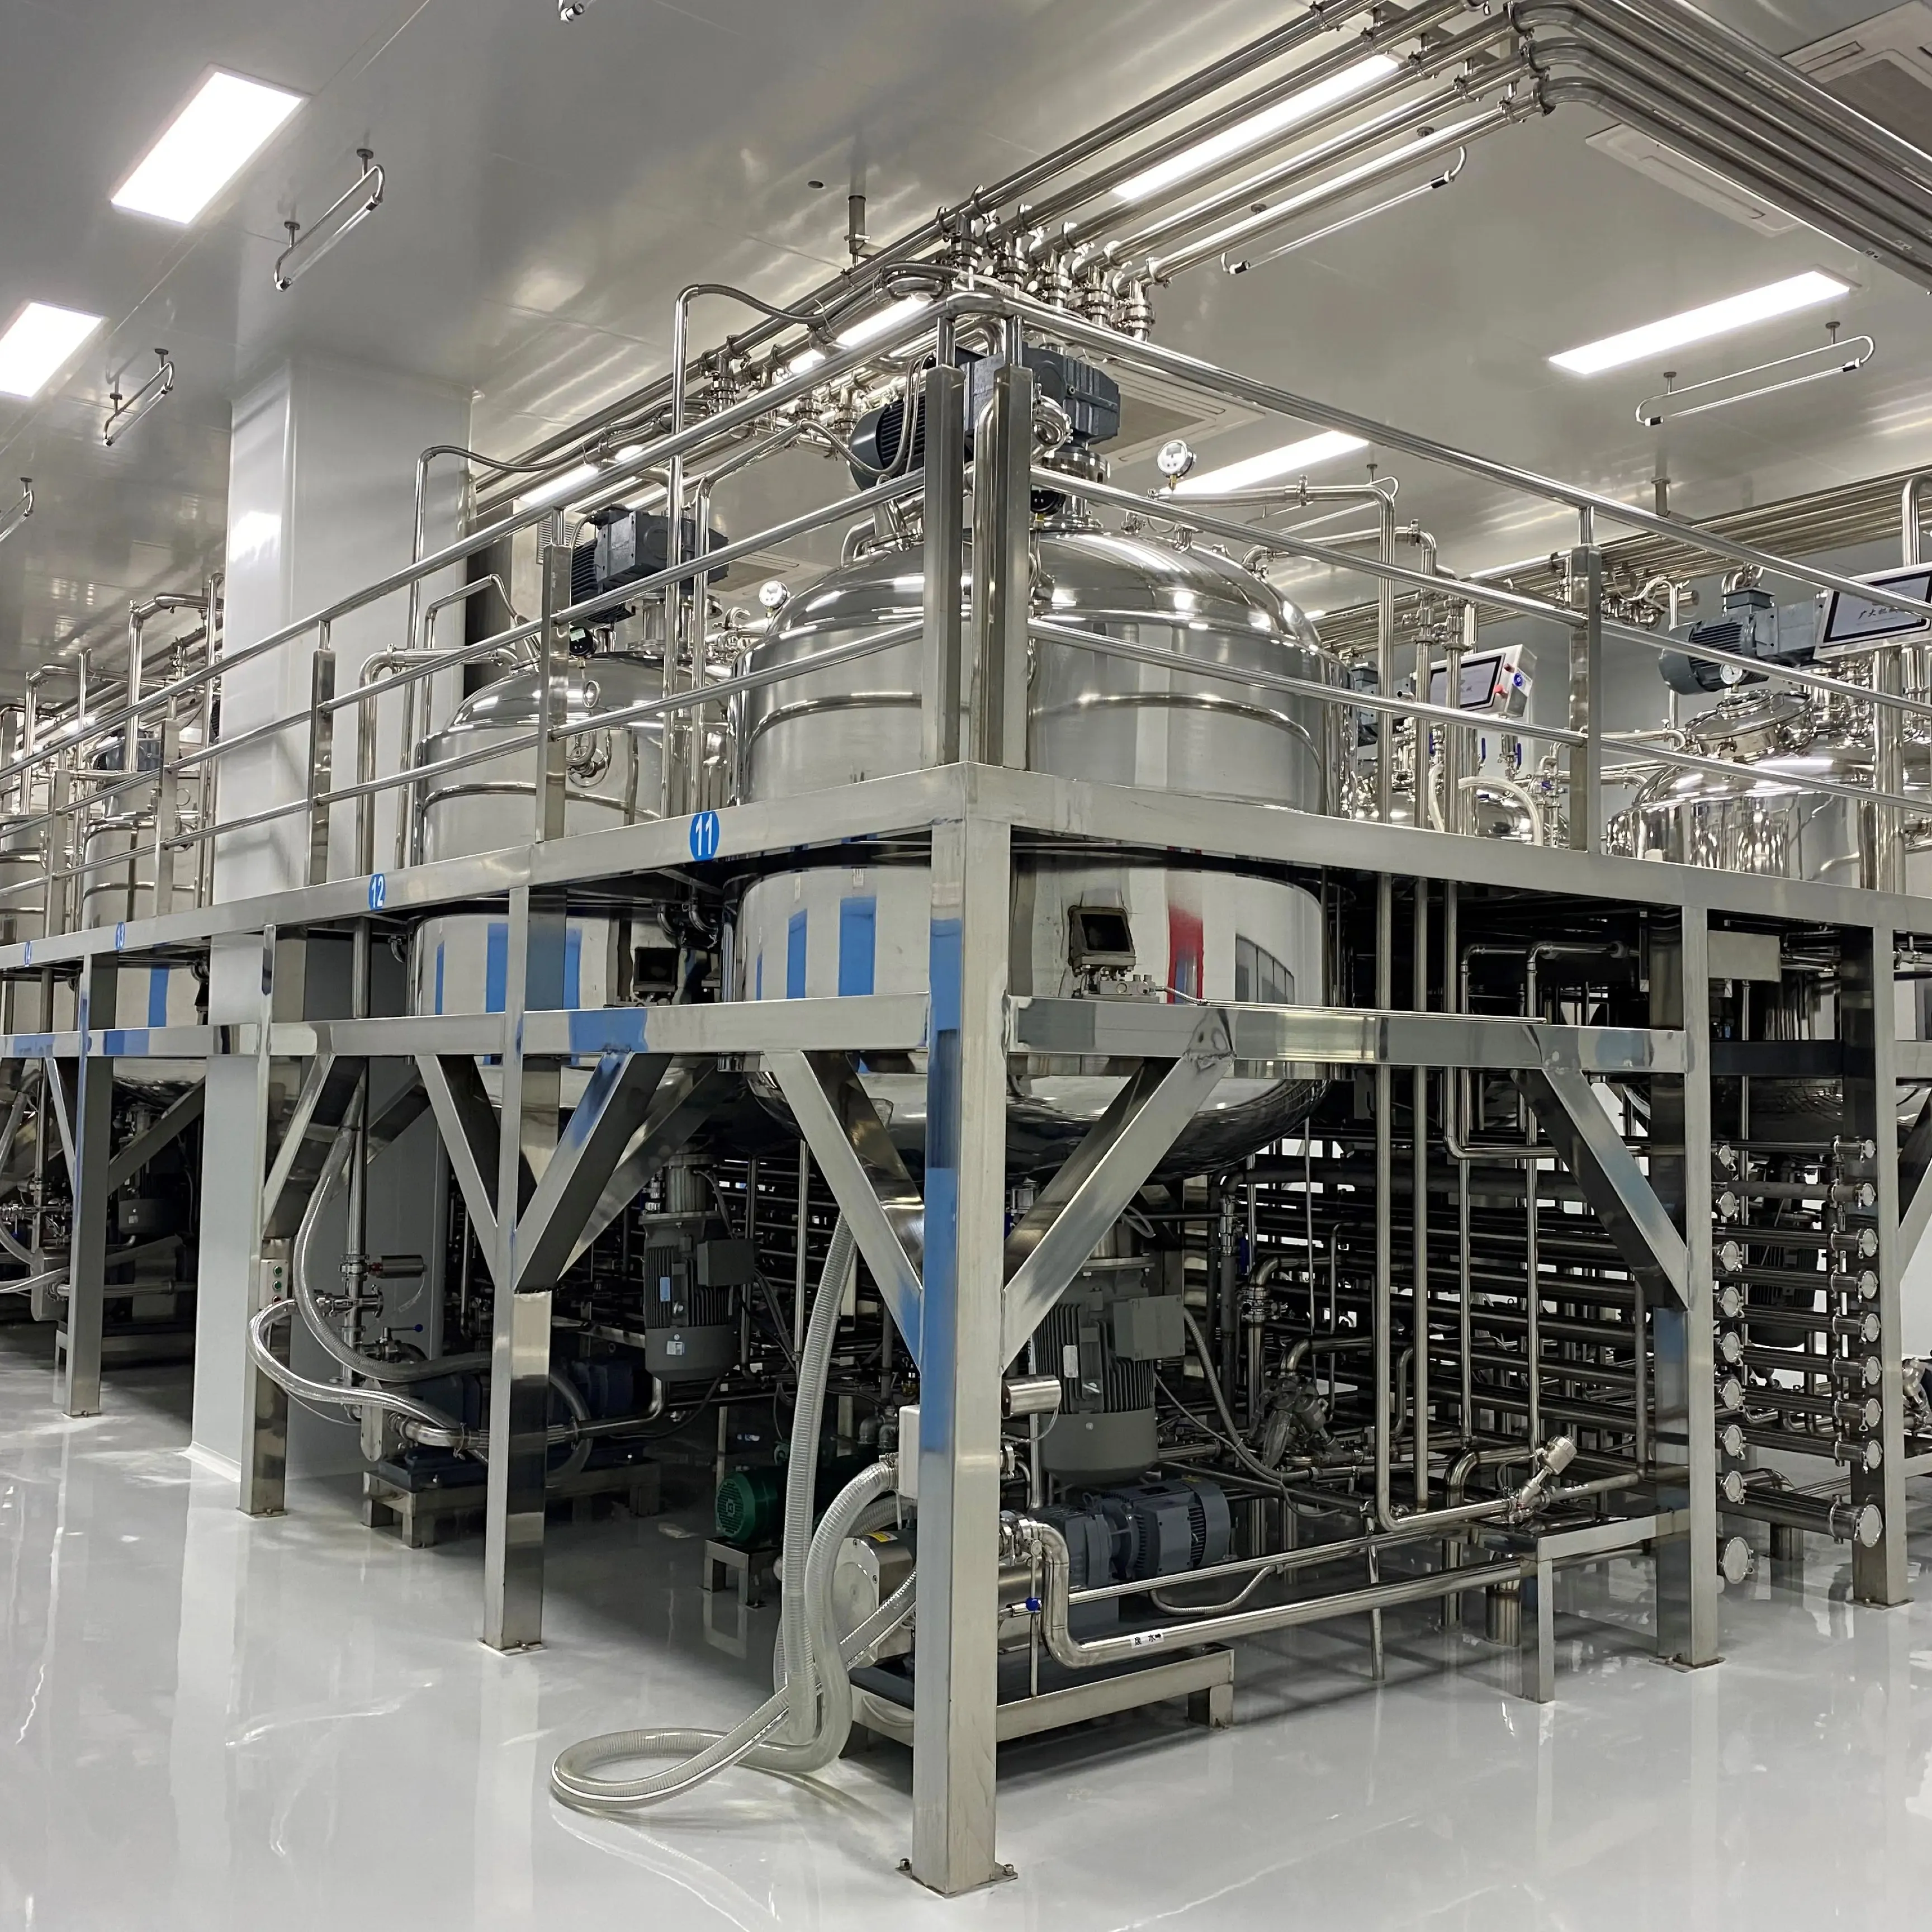 High-End Vacuum Emulsifying Mixer Adopting Innovative Vacuum Technology to Ensure Finer and More Uniform Emulsified Substances